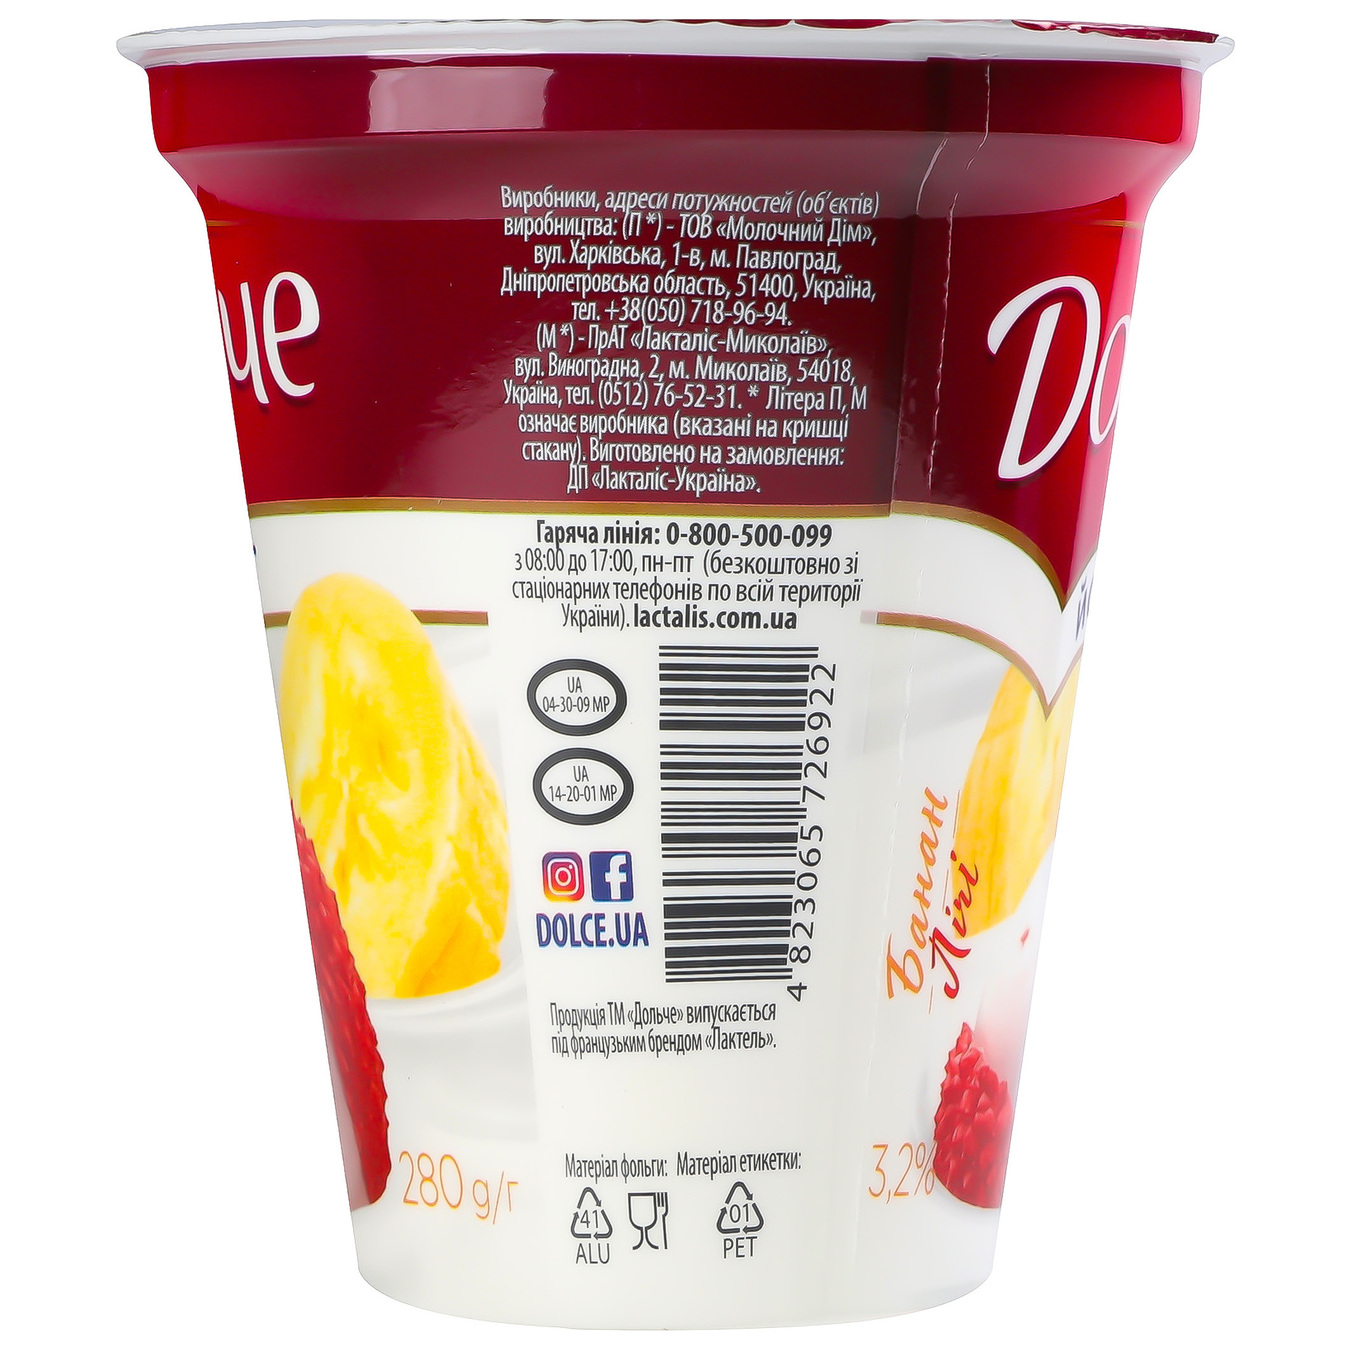 Dolce yogurt with banana-lychee filling 3.2% cup 280g 3